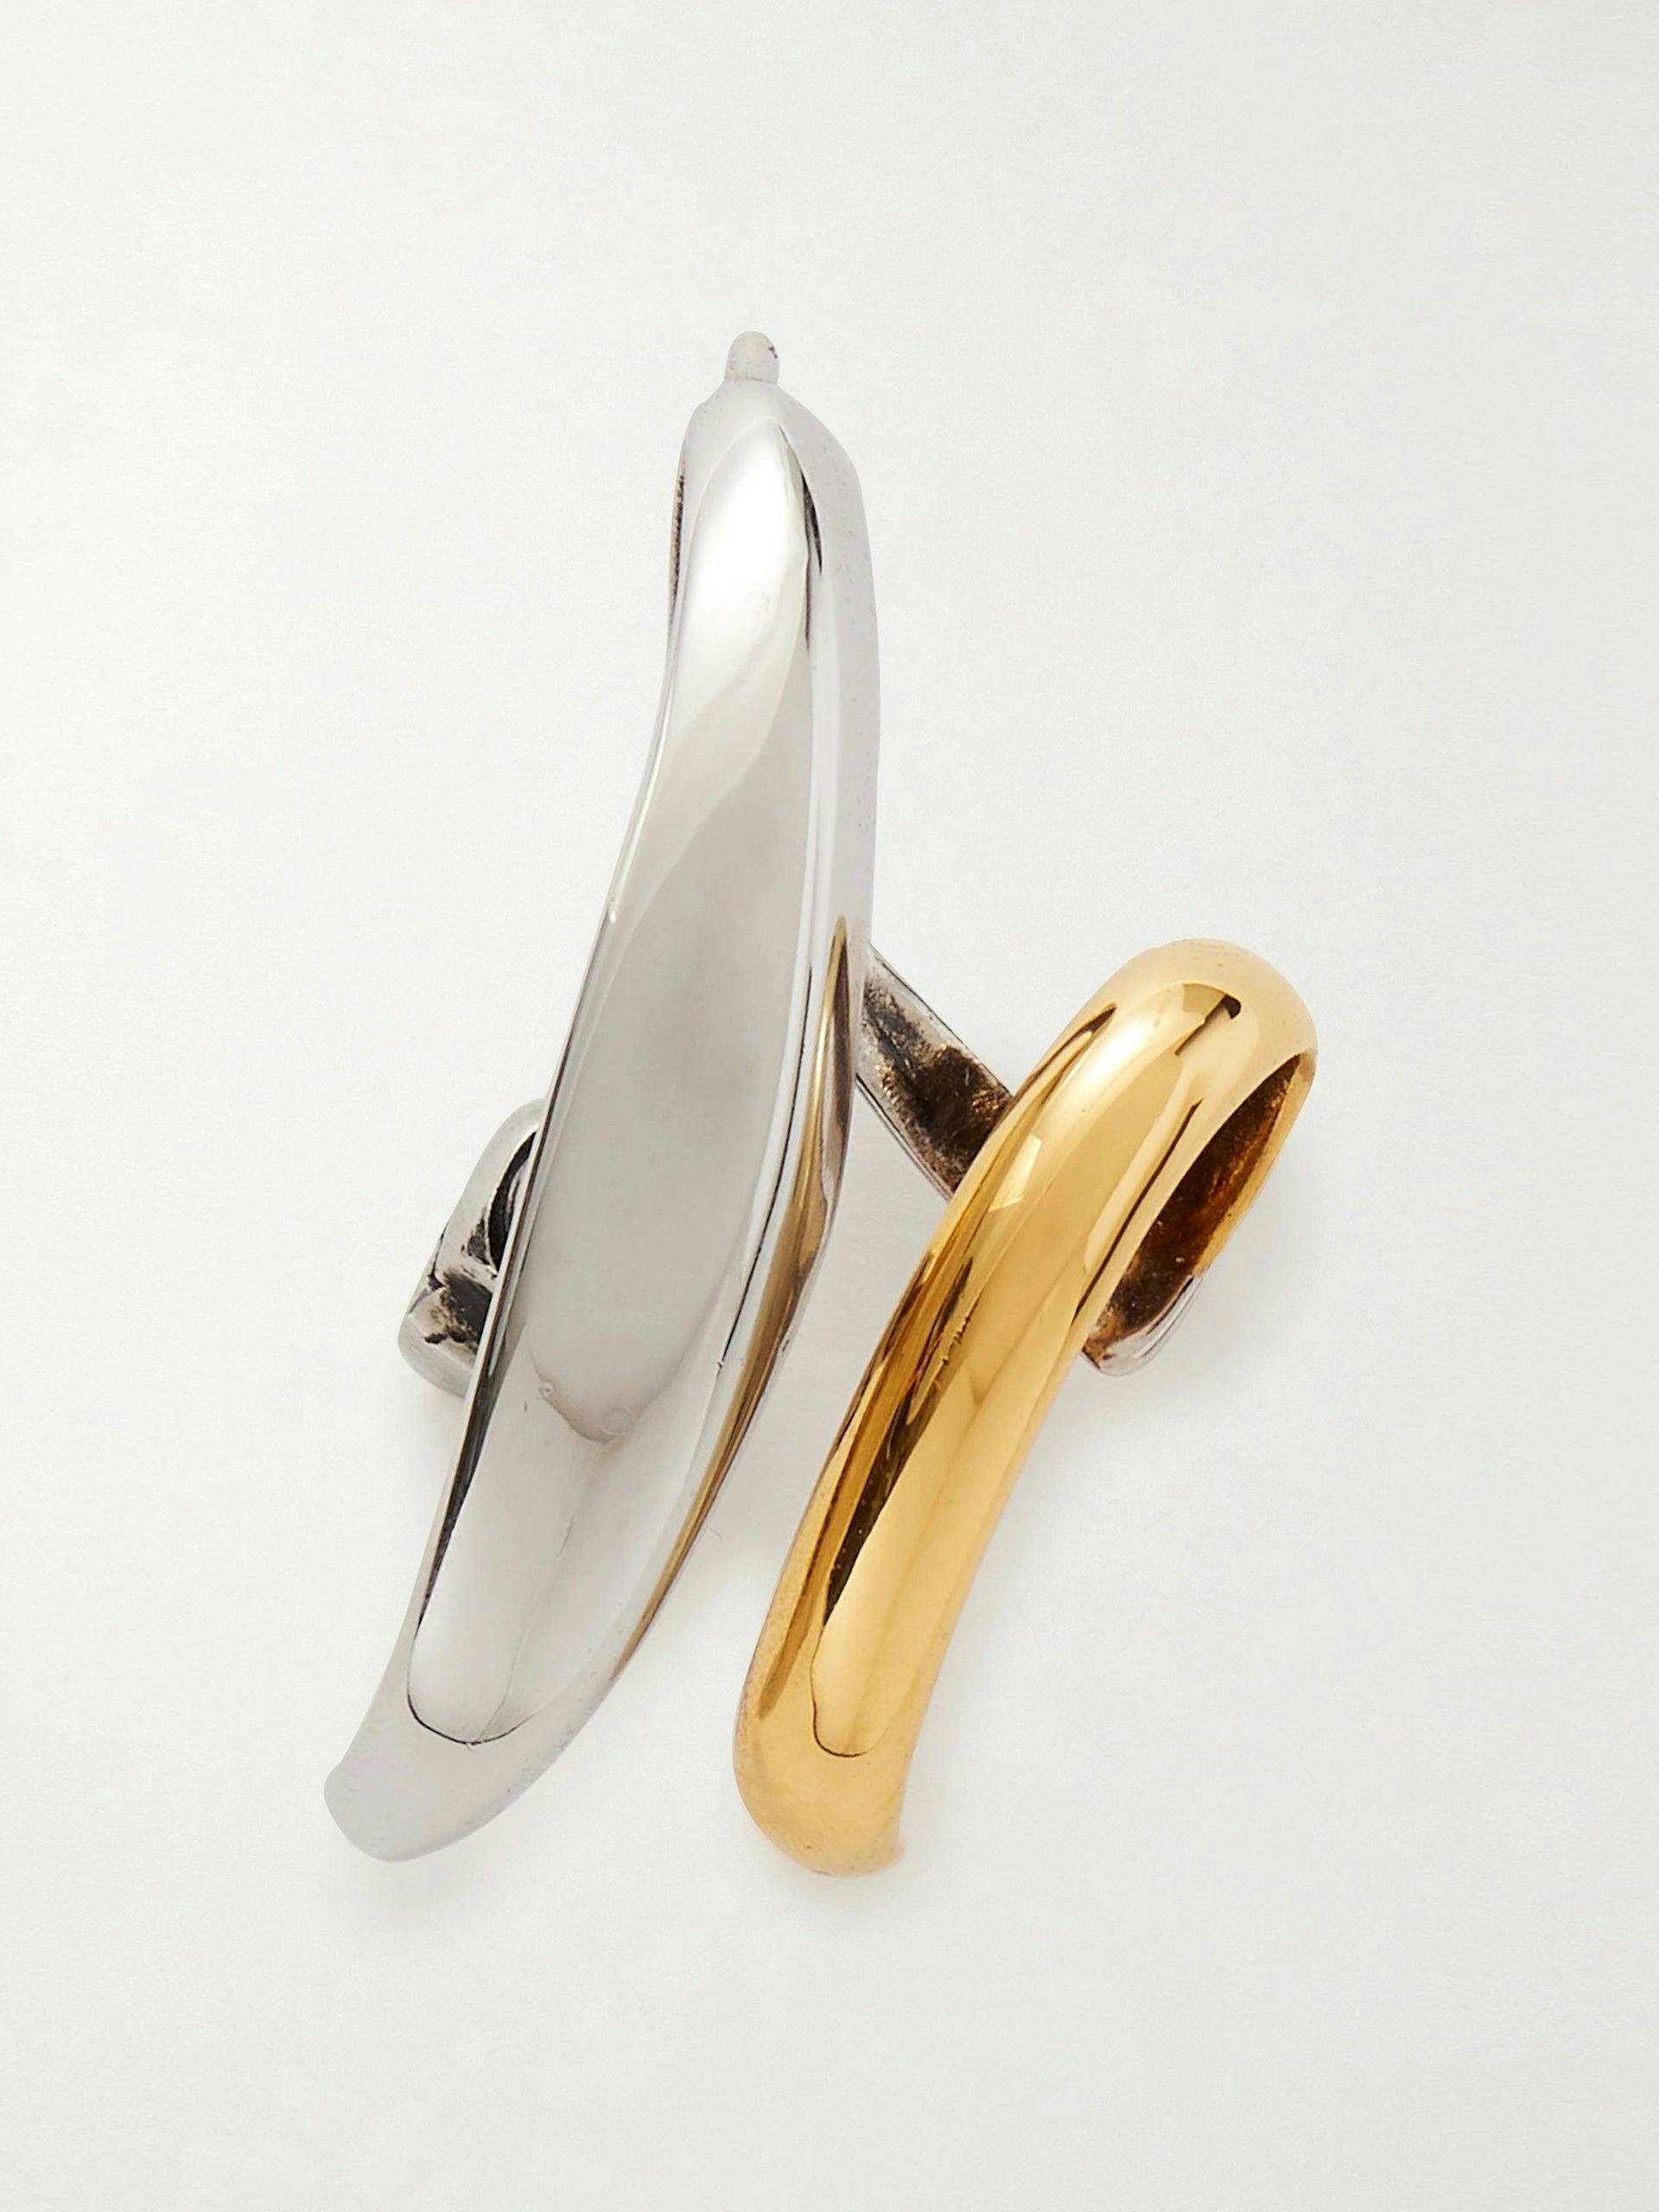 Silver- and gold-tone single earring